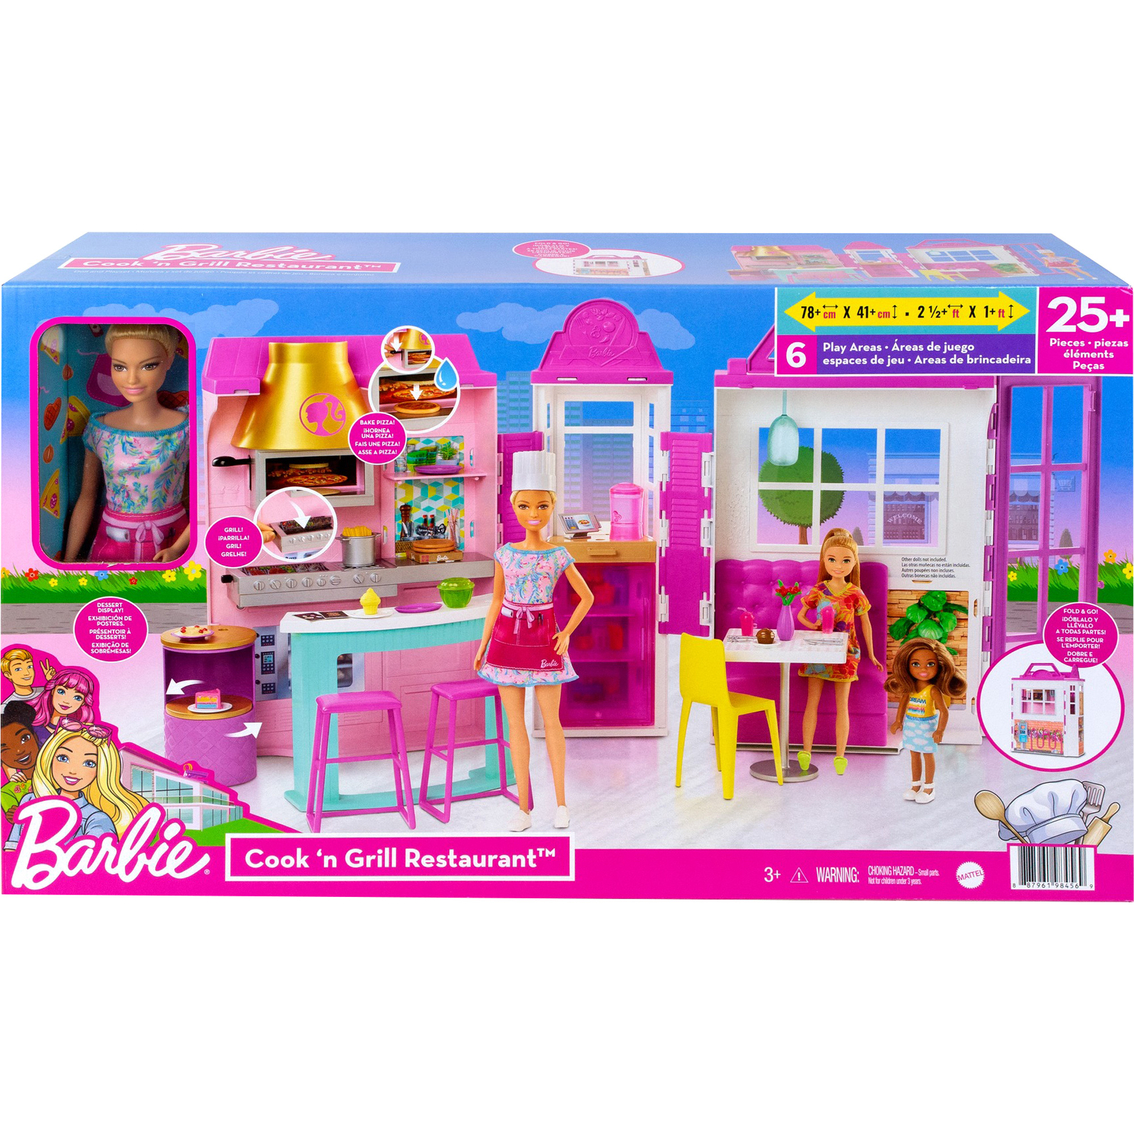 Barbie Cook 'n Grill Restaurant Doll & Playset - Image 1 of 4